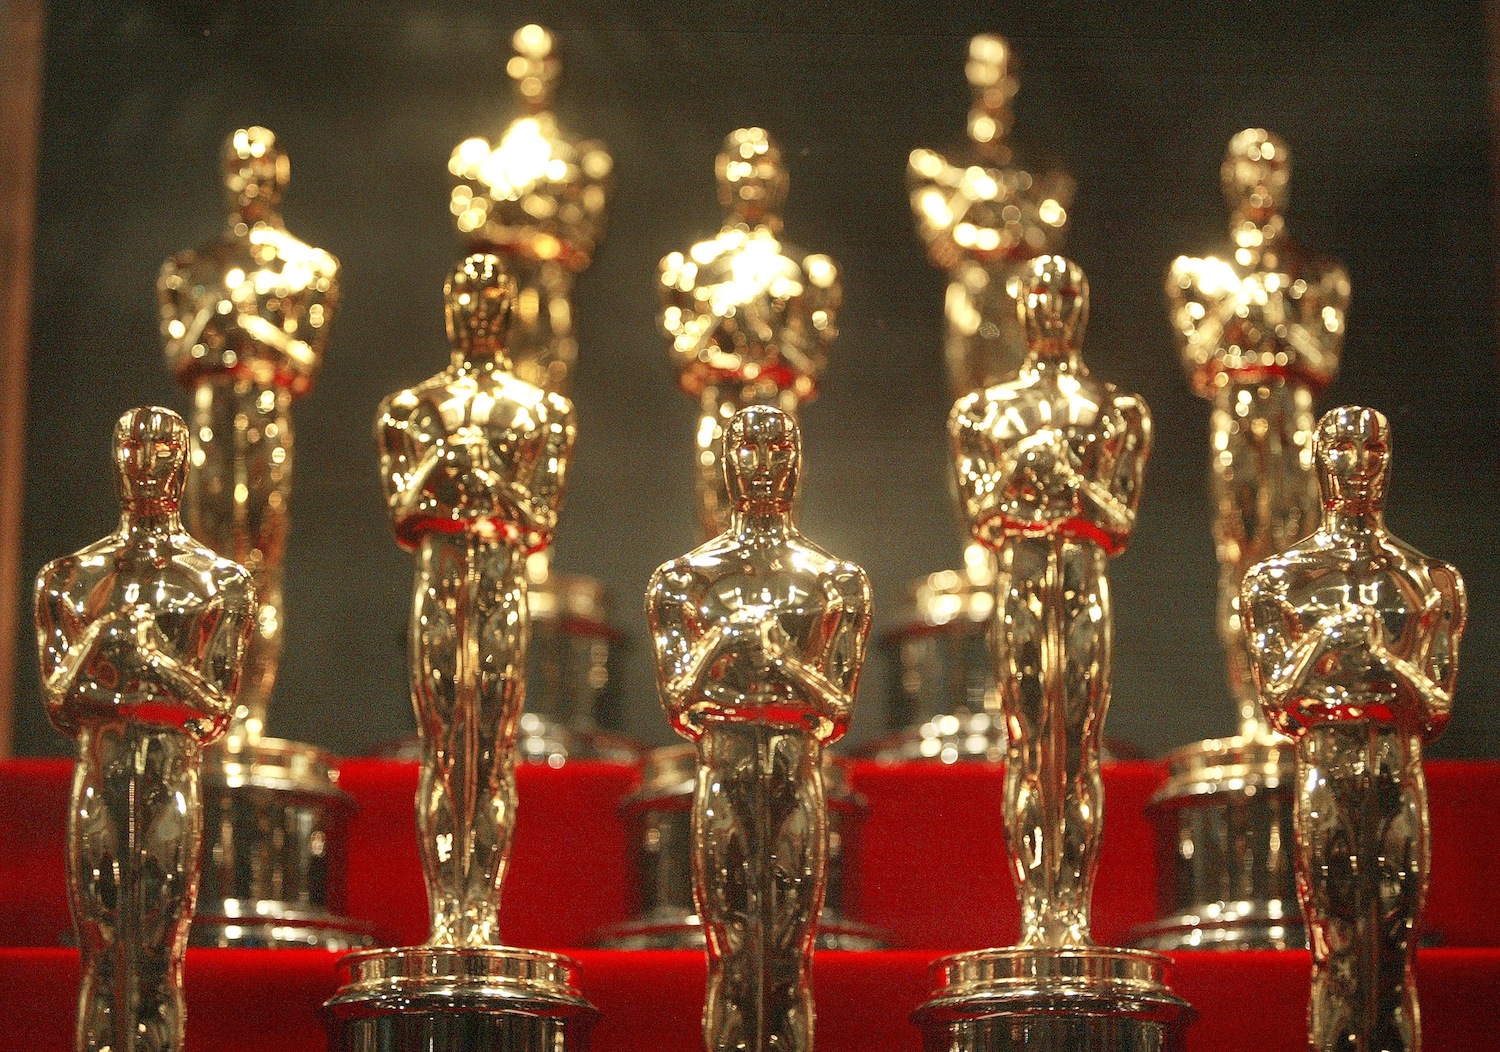 Oscar statuettes are displayed on Jan. 23, 2004, at the Museum of Science and Industry in Chicago, Illinois (Tim Boyle—Getty Images)